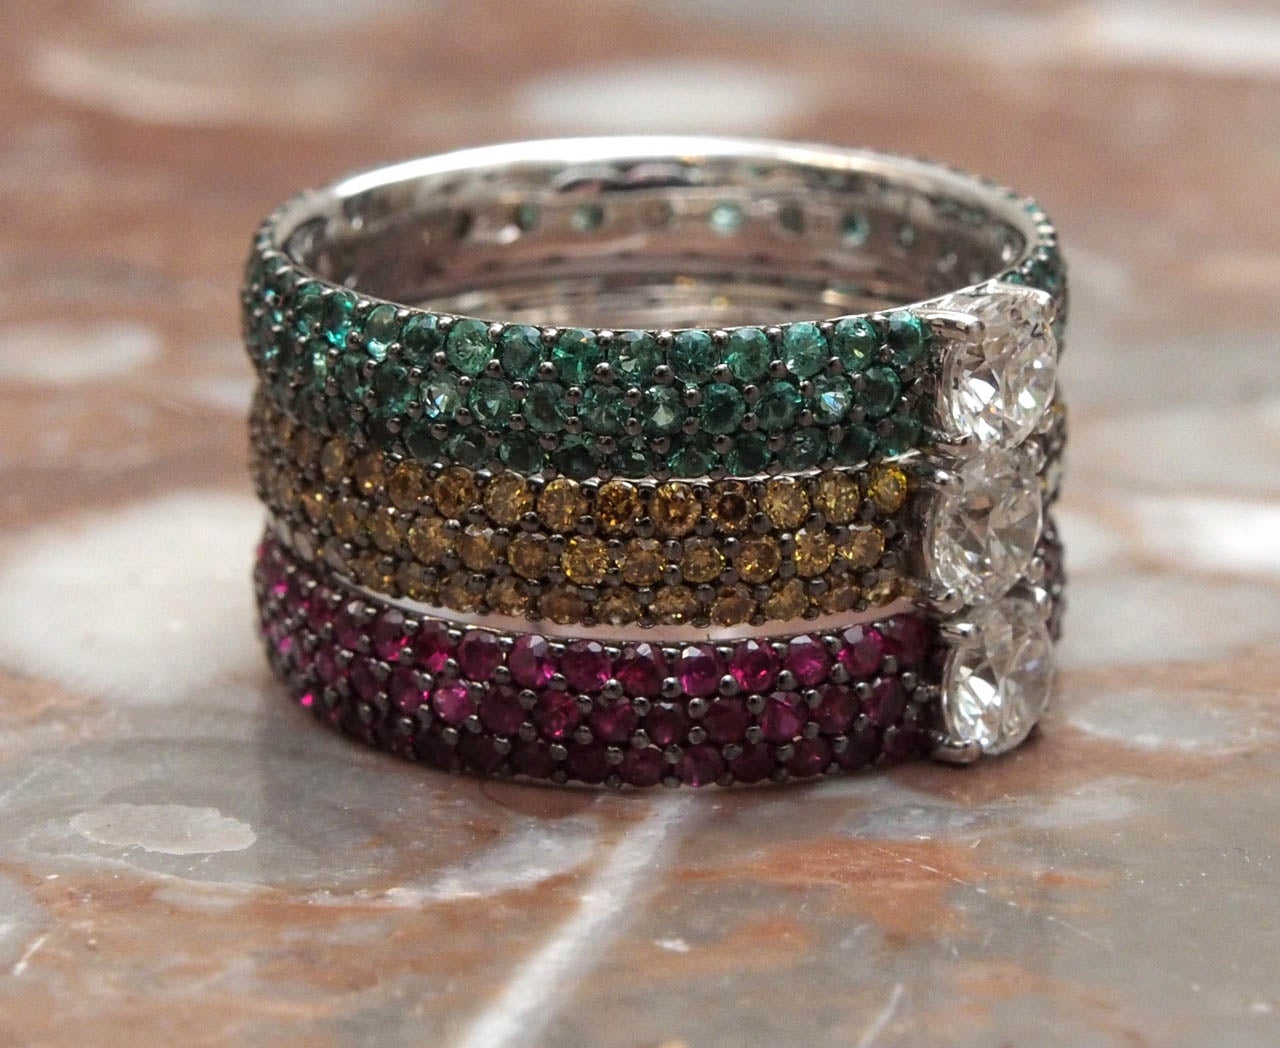 Pave Ruby,Champagne Diamond and Emerald Rings each containing a .22 full cut diamond. Offered as single rings